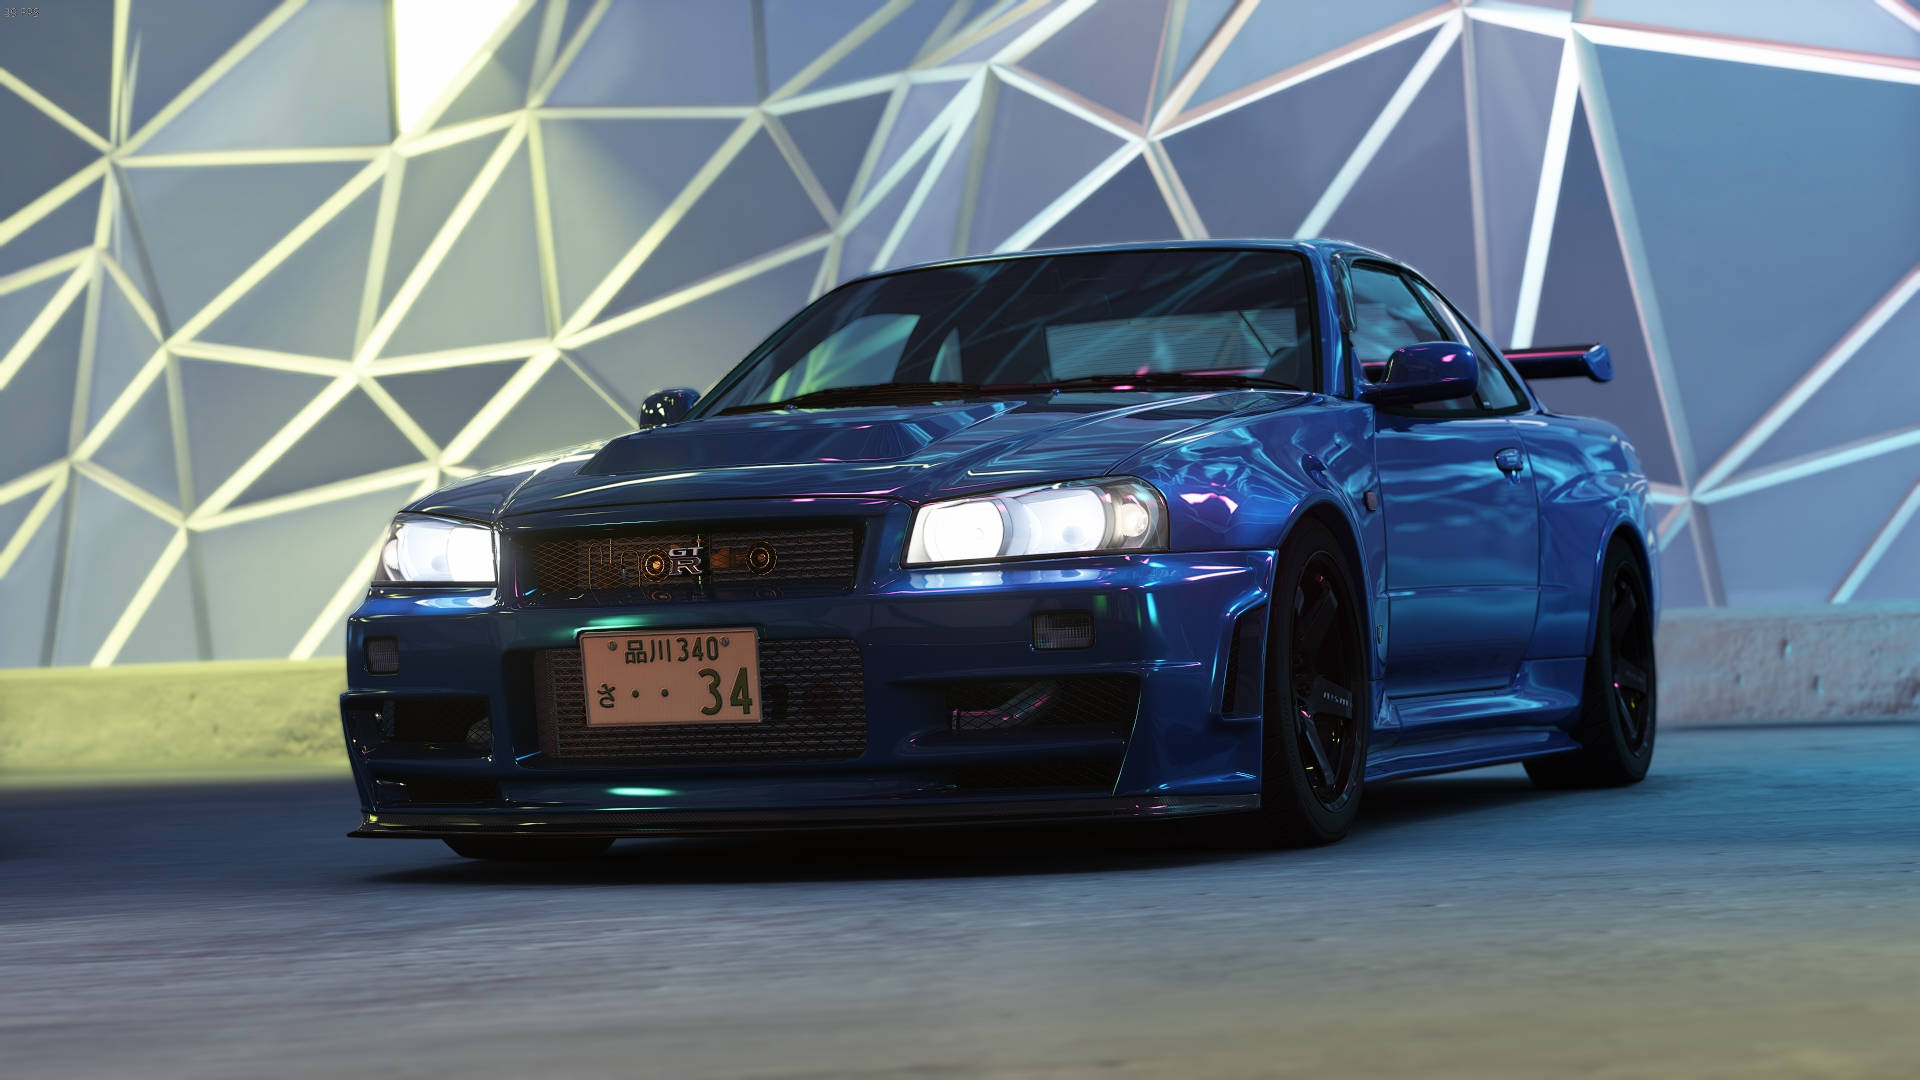 R34 Pictures Wallpaper